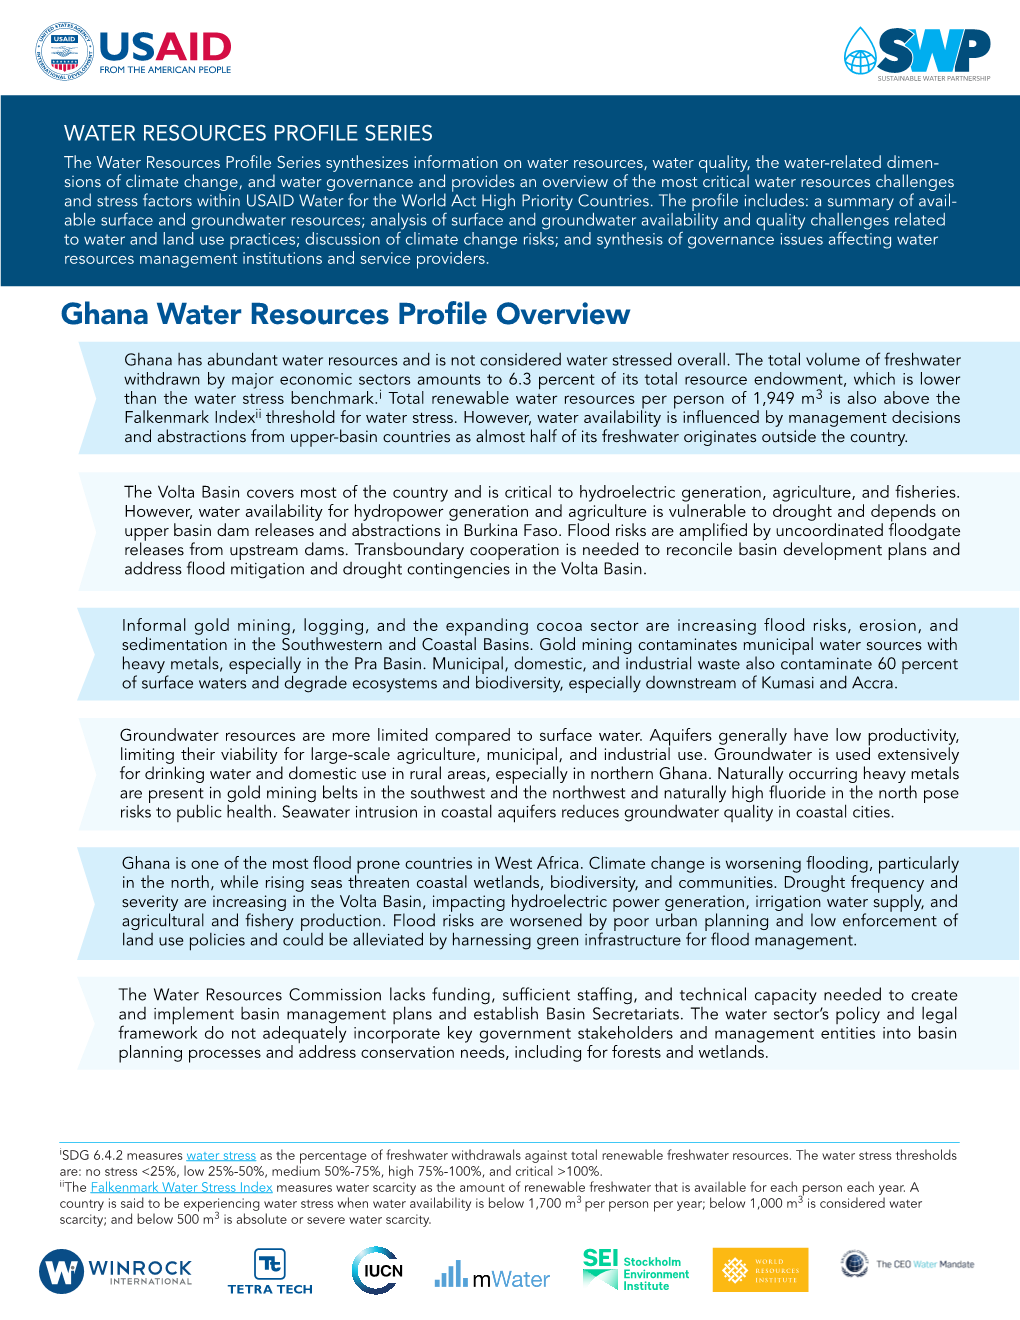 Ghana Water Resources Profile Overview Ghana Has Abundant Water Resources and Is Not Considered Water Stressed Overall